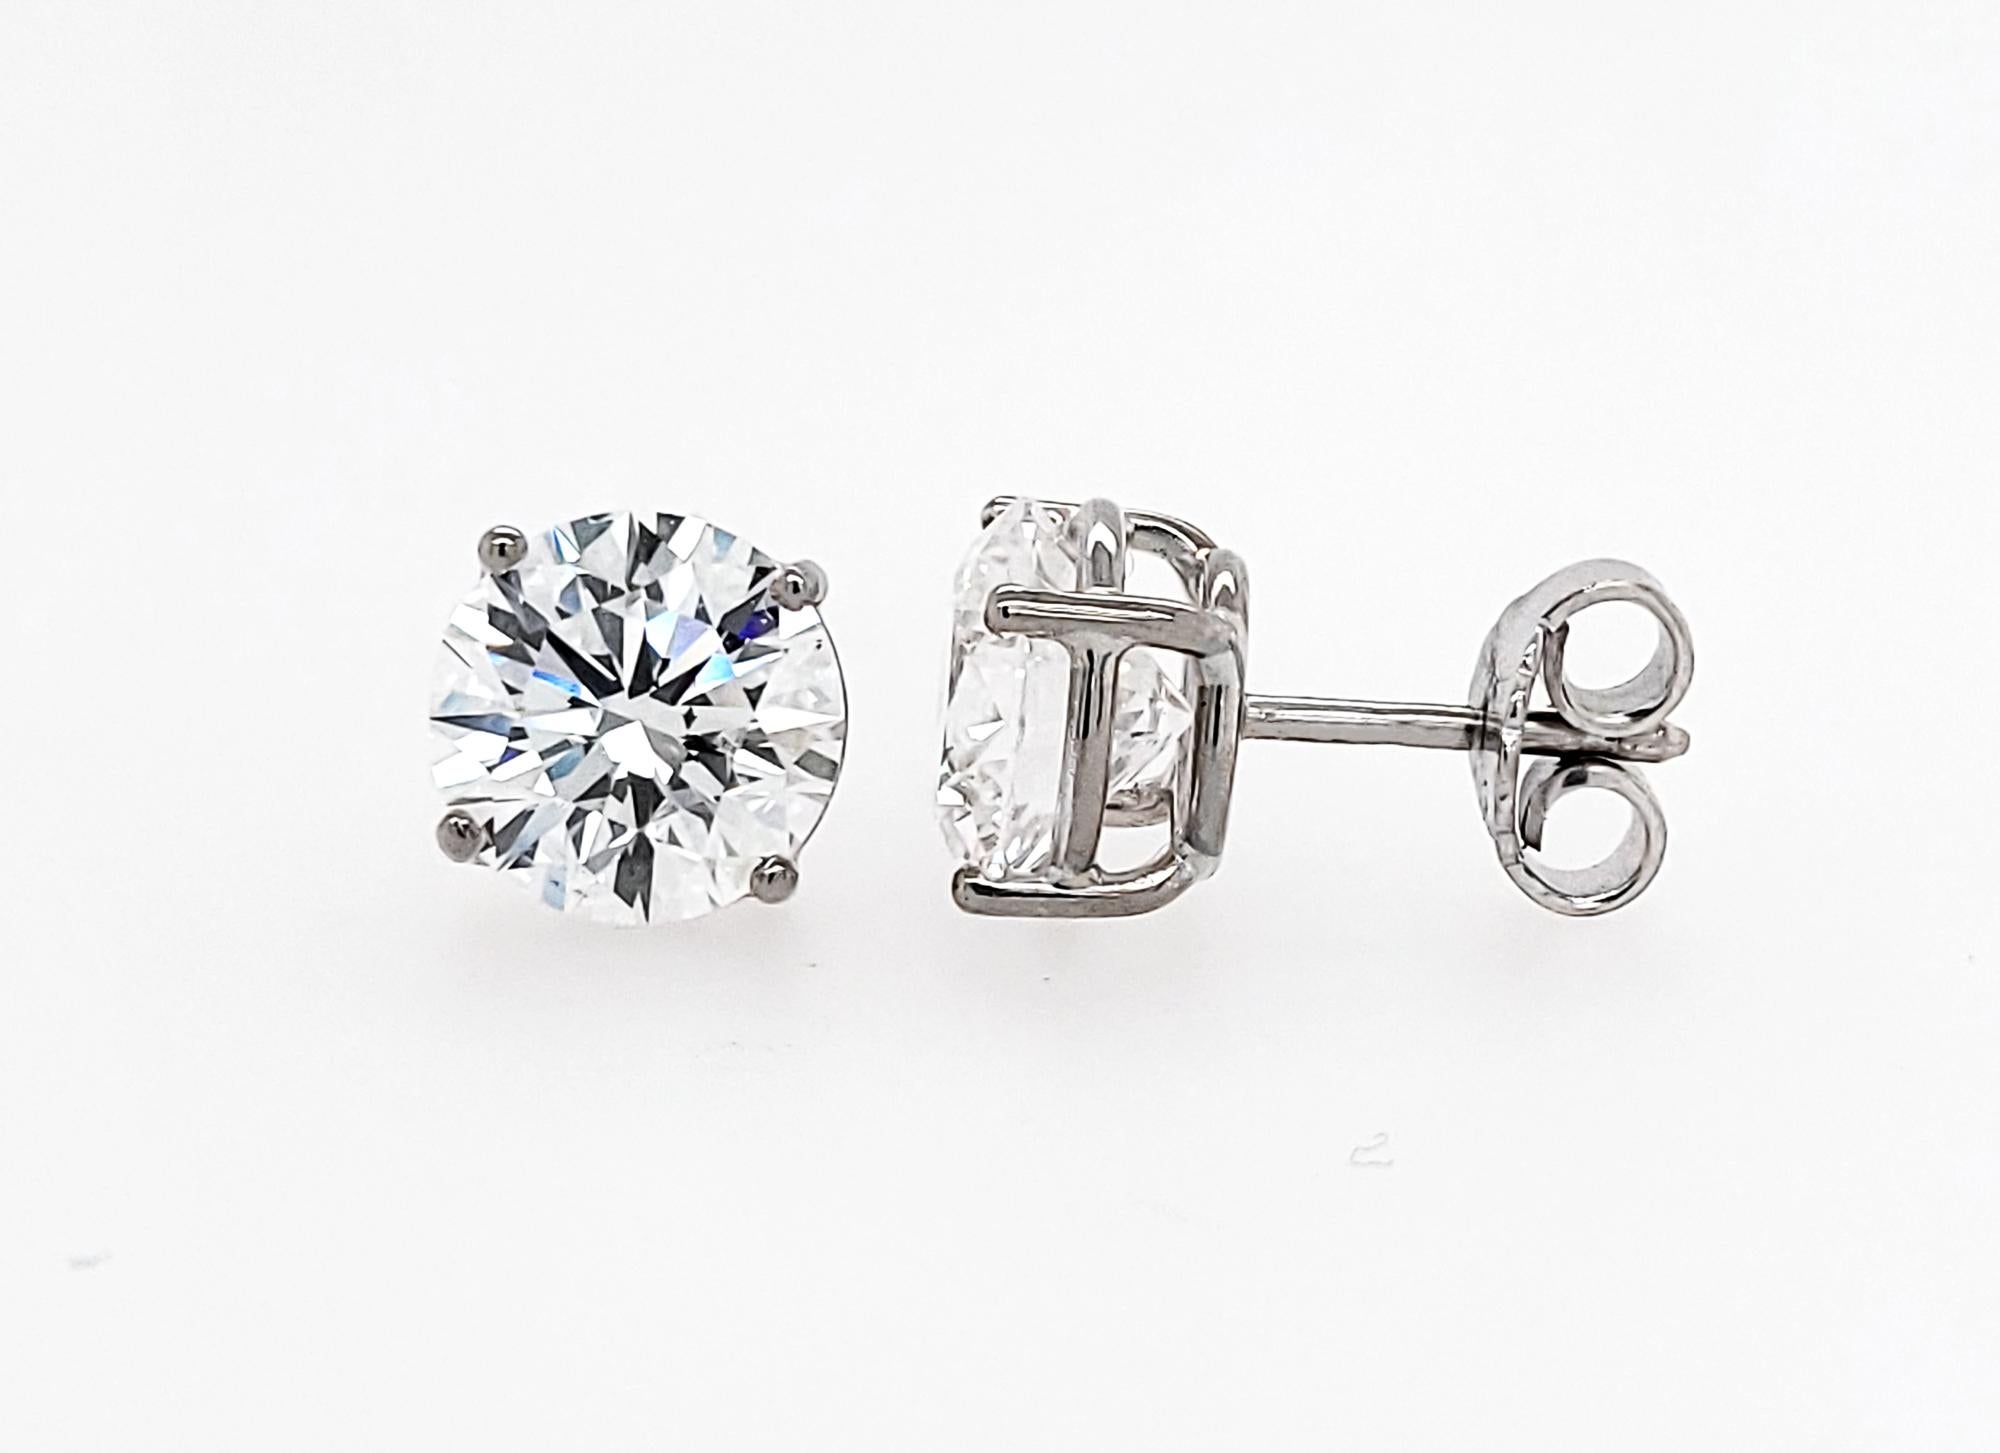 Beautiful stud earrings featuring 2.09 & 2.16 carat round diamonds.
The diamonds are GIA certified stating that they are of D color, VS2 clarity. 
Total carat weight is 4.25.
18k White Gold is 3.59 grams.
